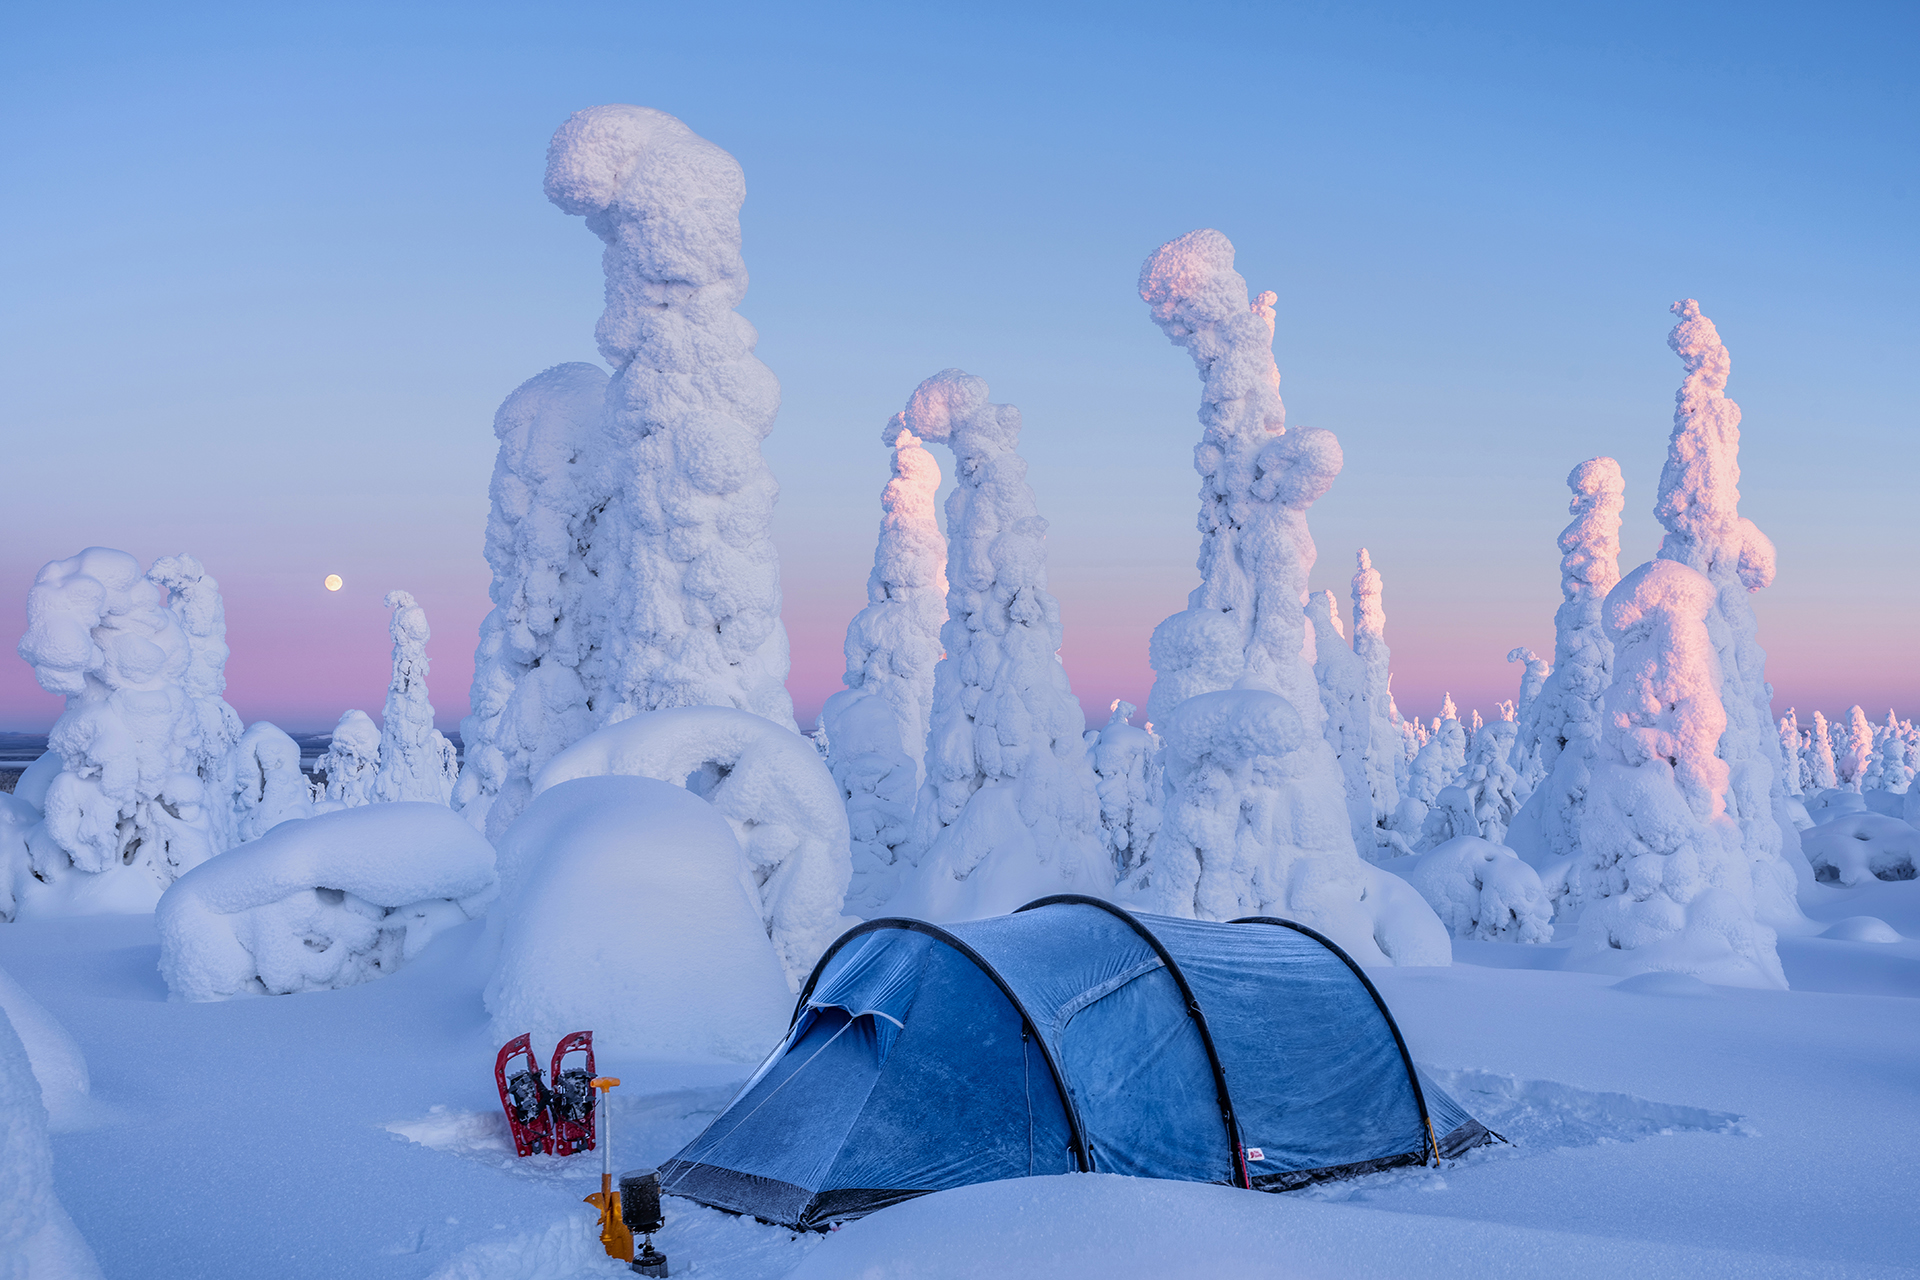 15 days and nights in magical Lapland